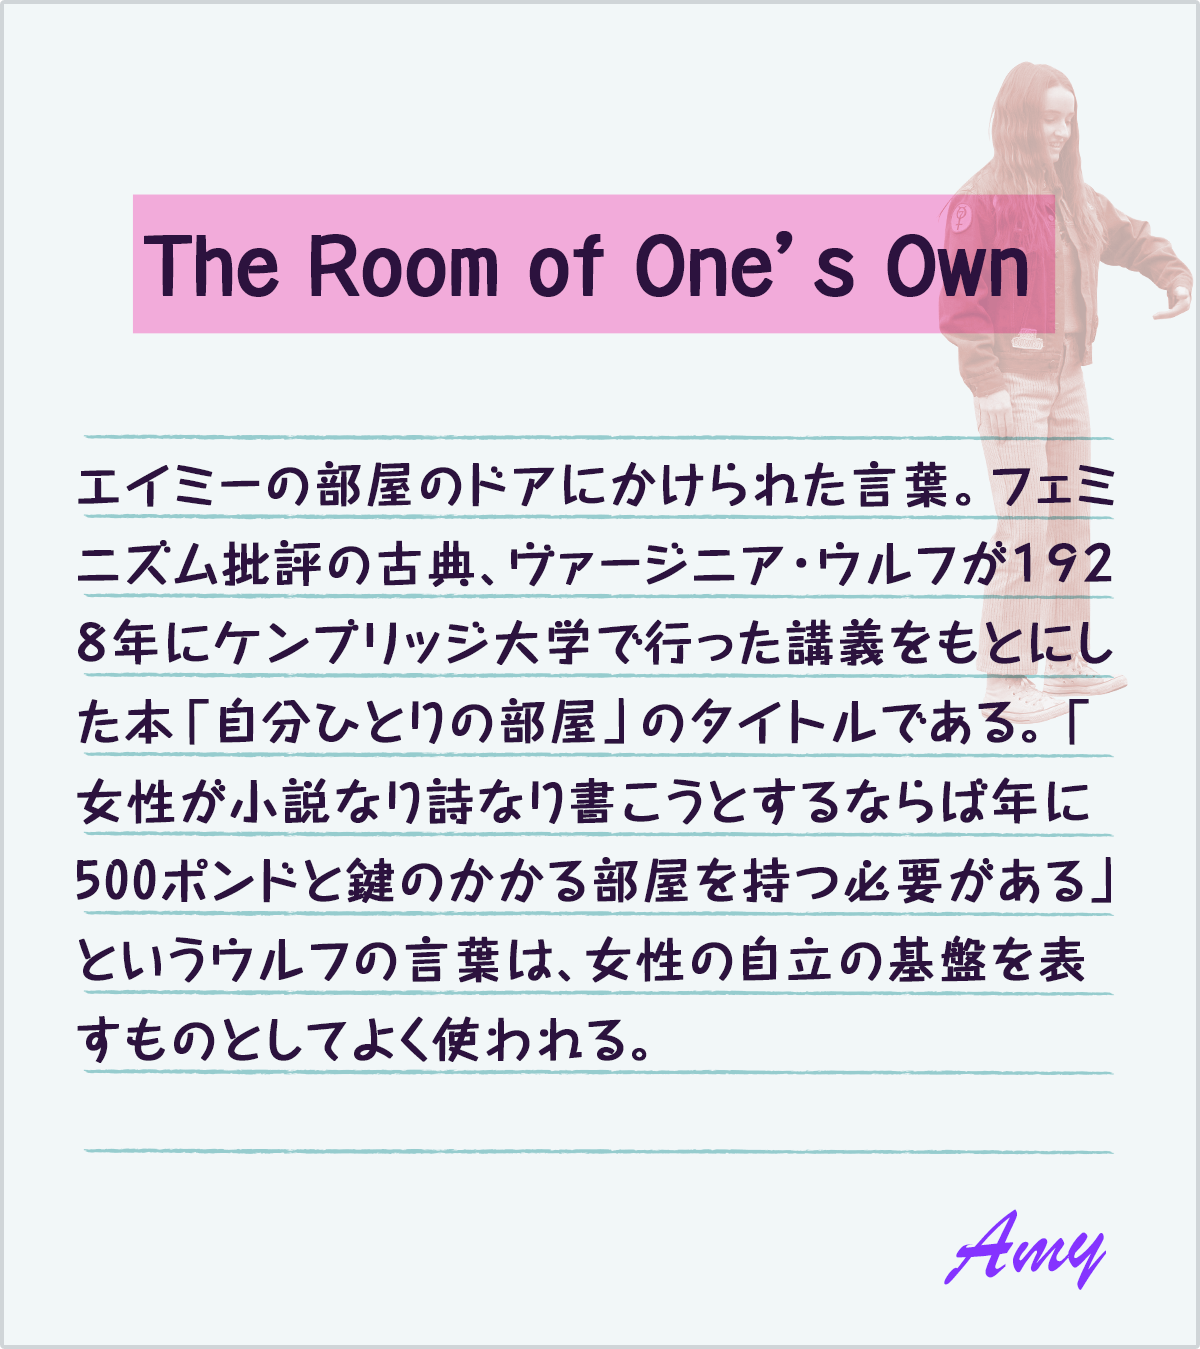 The Room of One’s Own